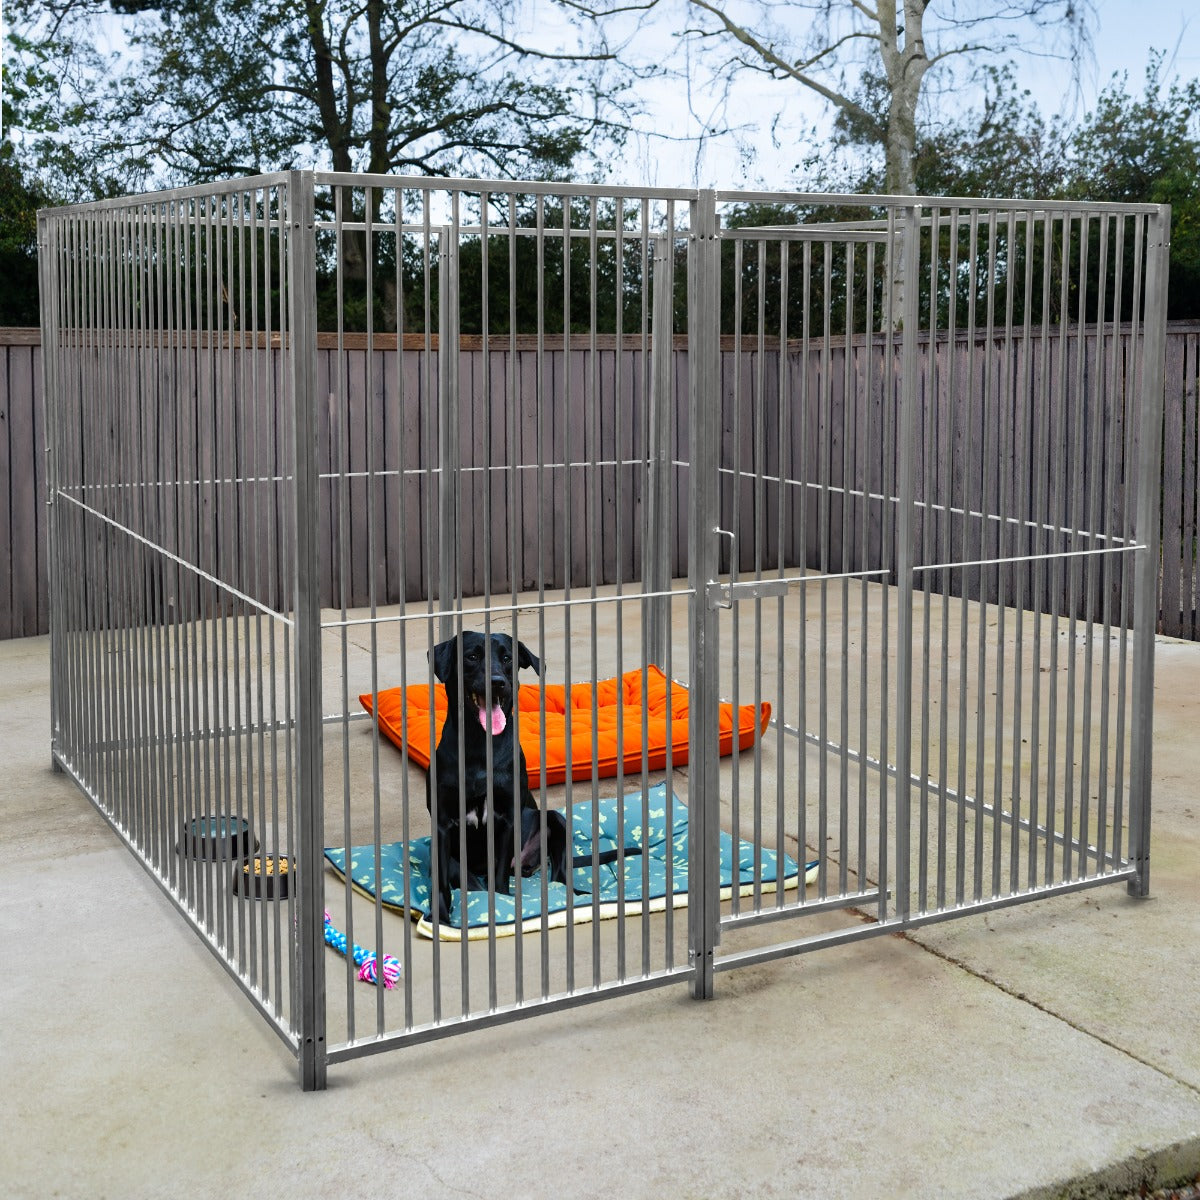 1.5m Dog Run Panel With Door – 5cm Bar Spacing - Used - Acceptable